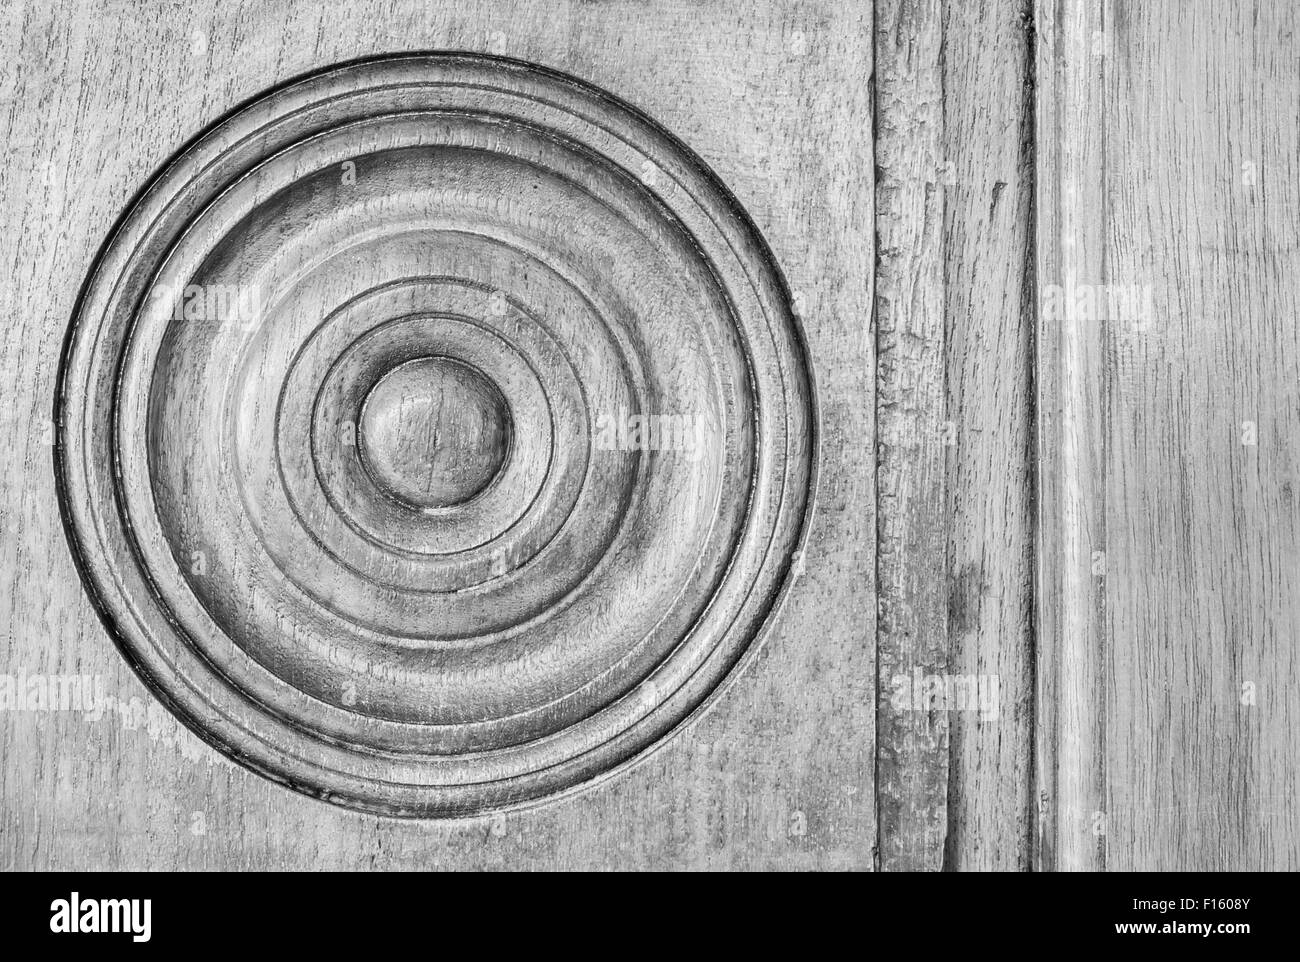 Black and White image of an antique circular wooden panel. Stock Photo